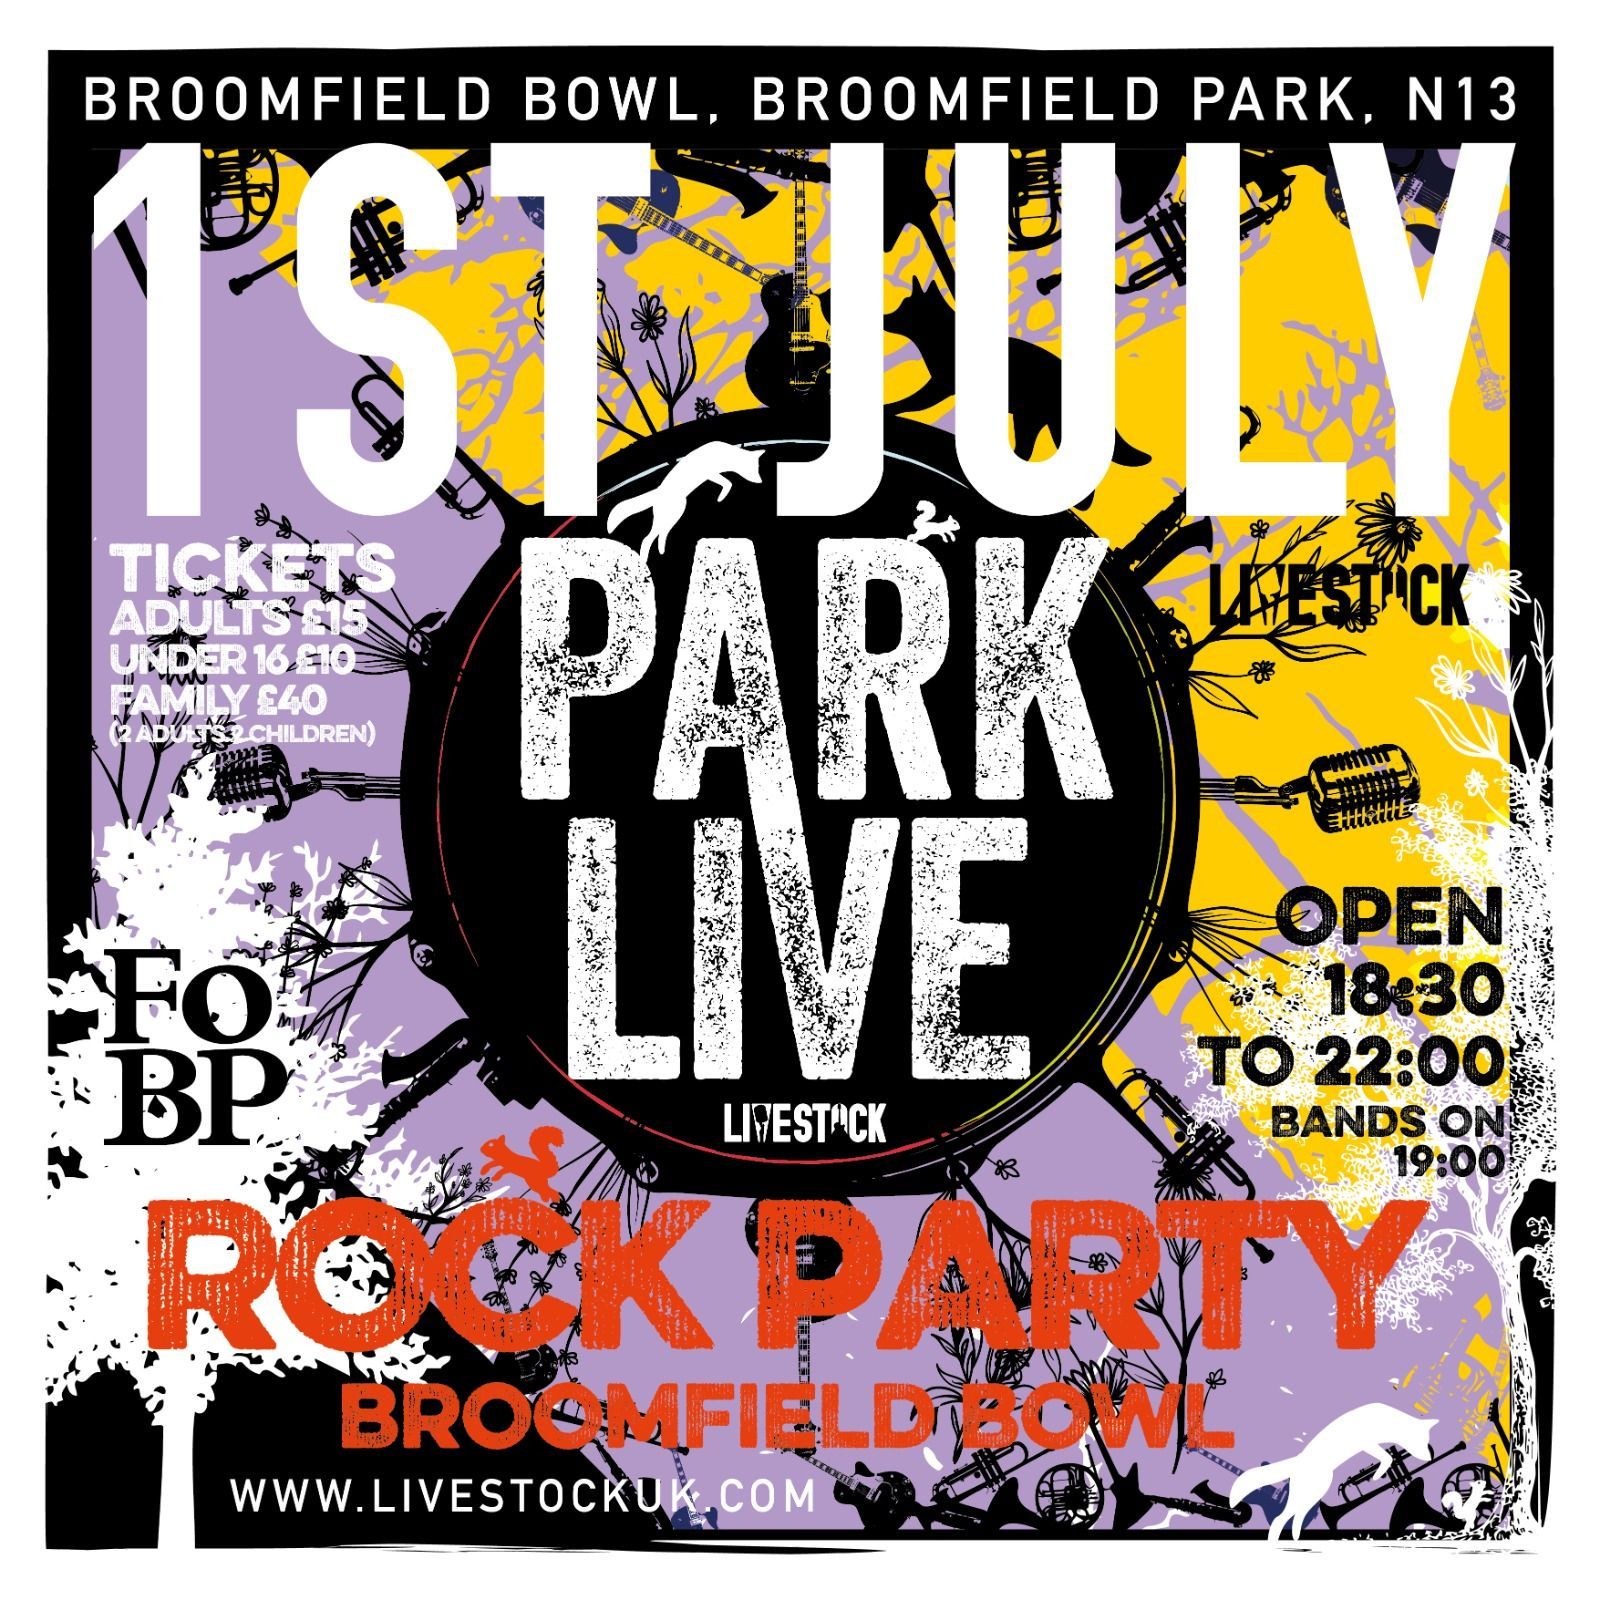 A poster for a rock party at broomfield bowl